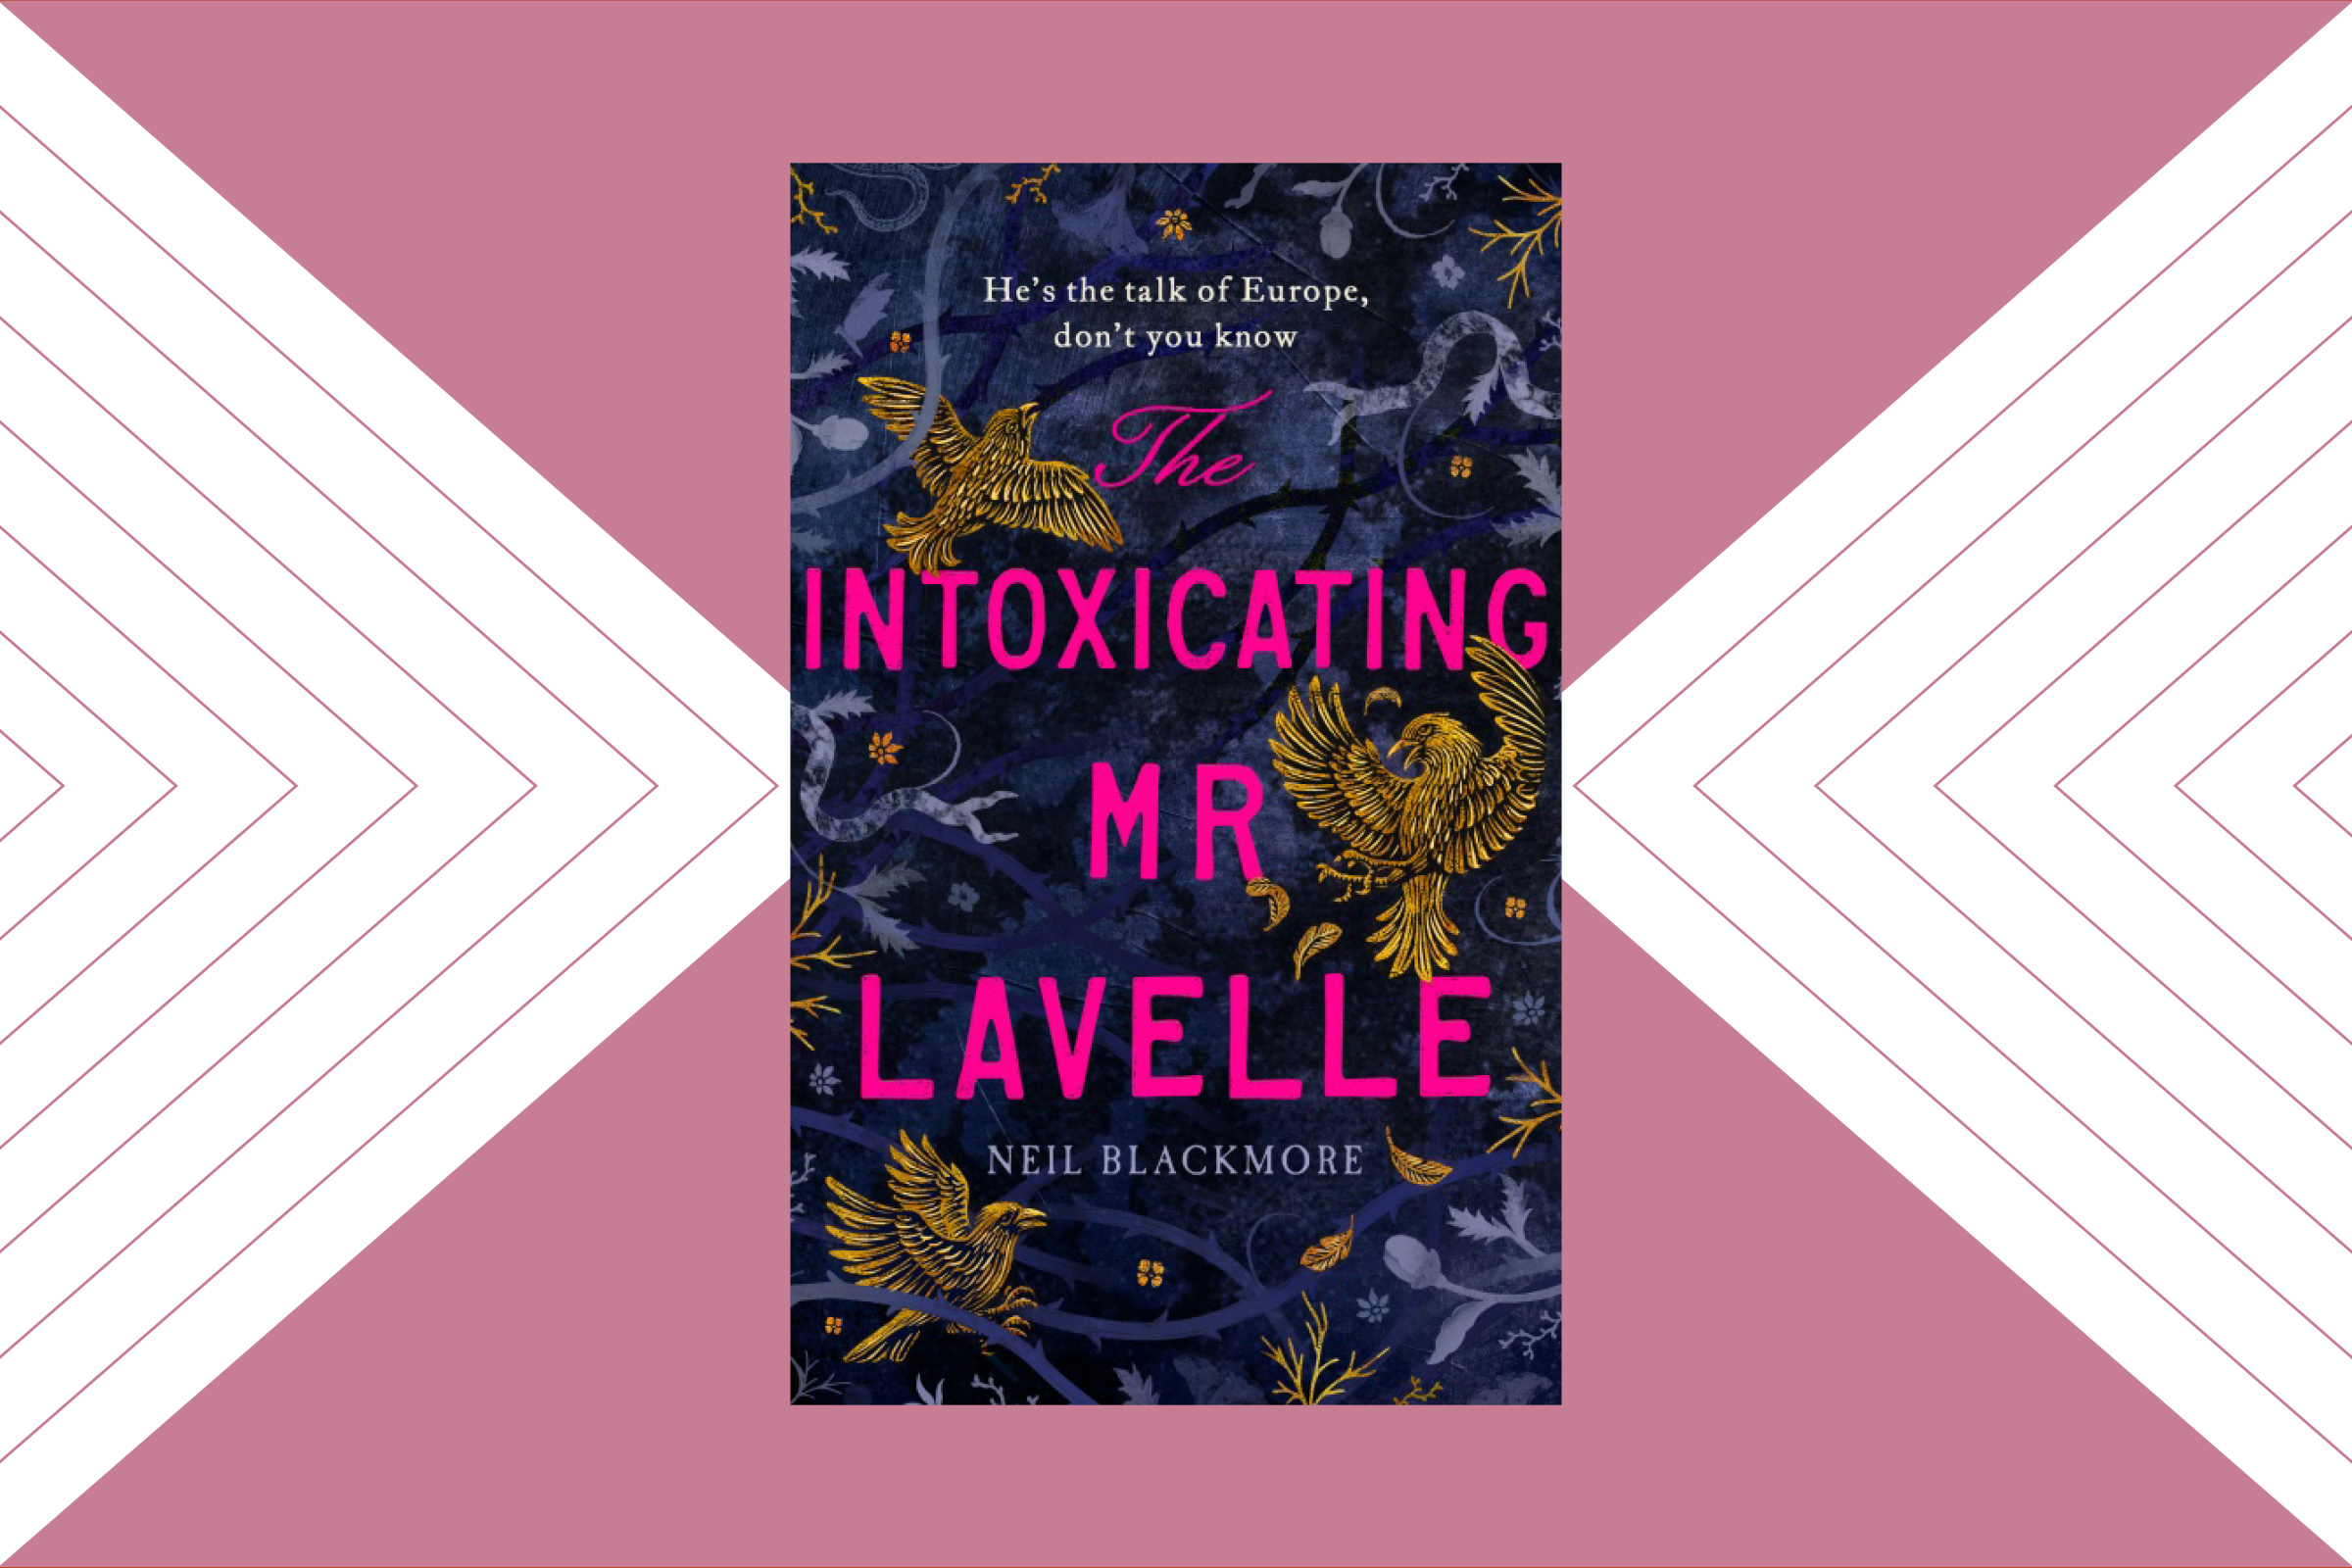 Book of the Week: The Intoxicating Mr Lavelle